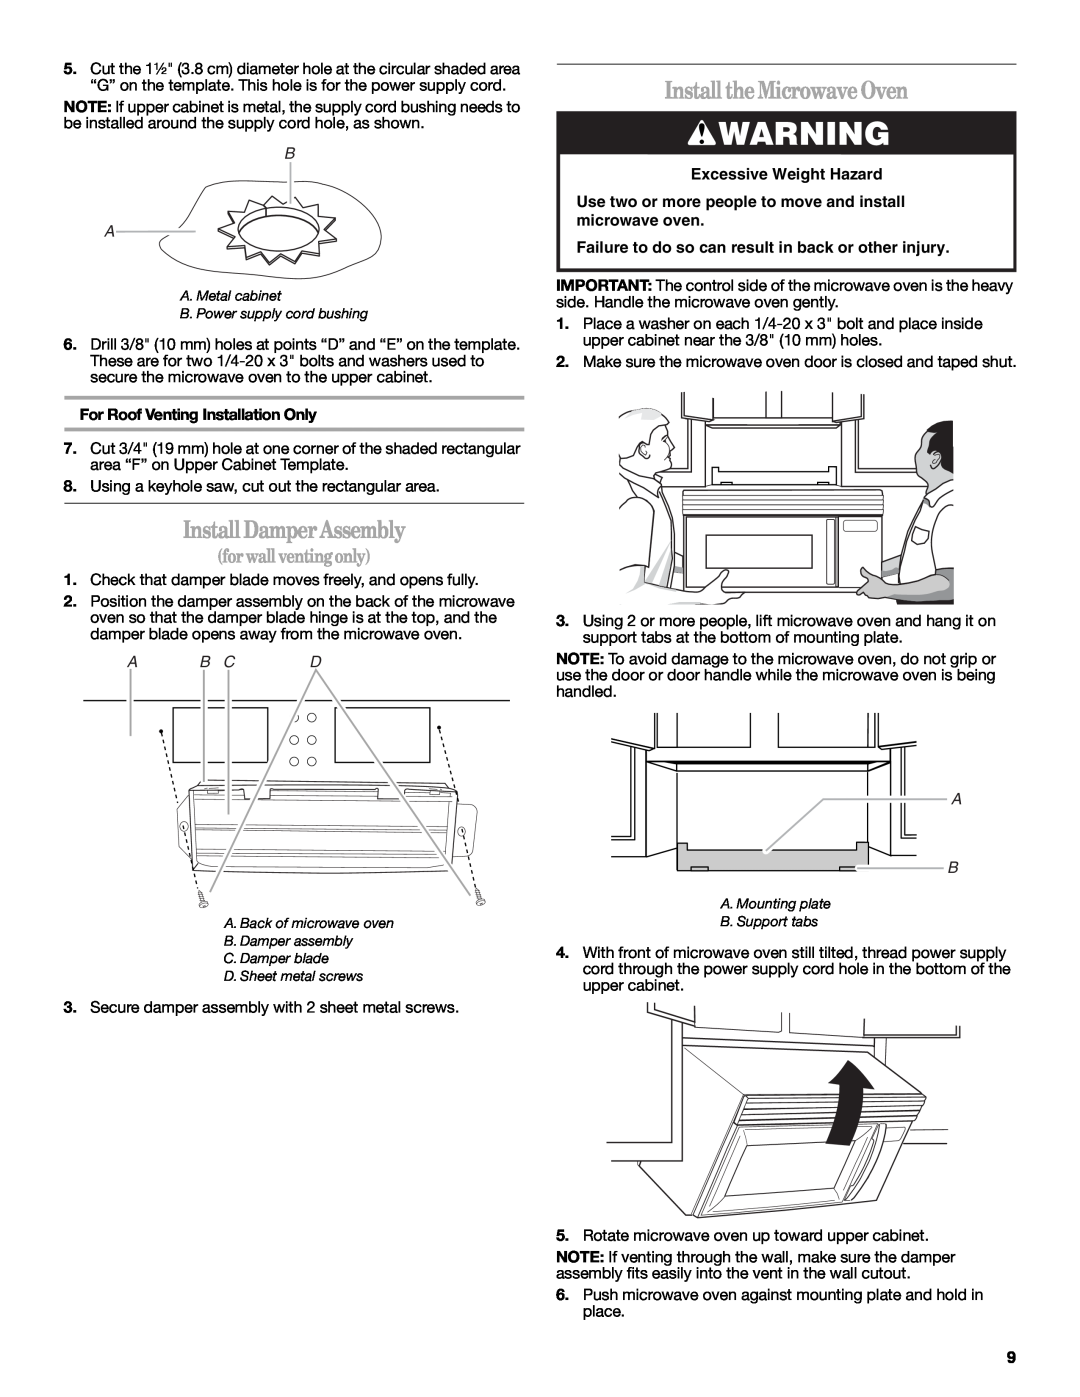 Whirlpool MH3184XPS5 InstallDamperAssembly, InstalltheMicrowaveOven, A B Cd, Excessive Weight Hazard, forwallventingonly 